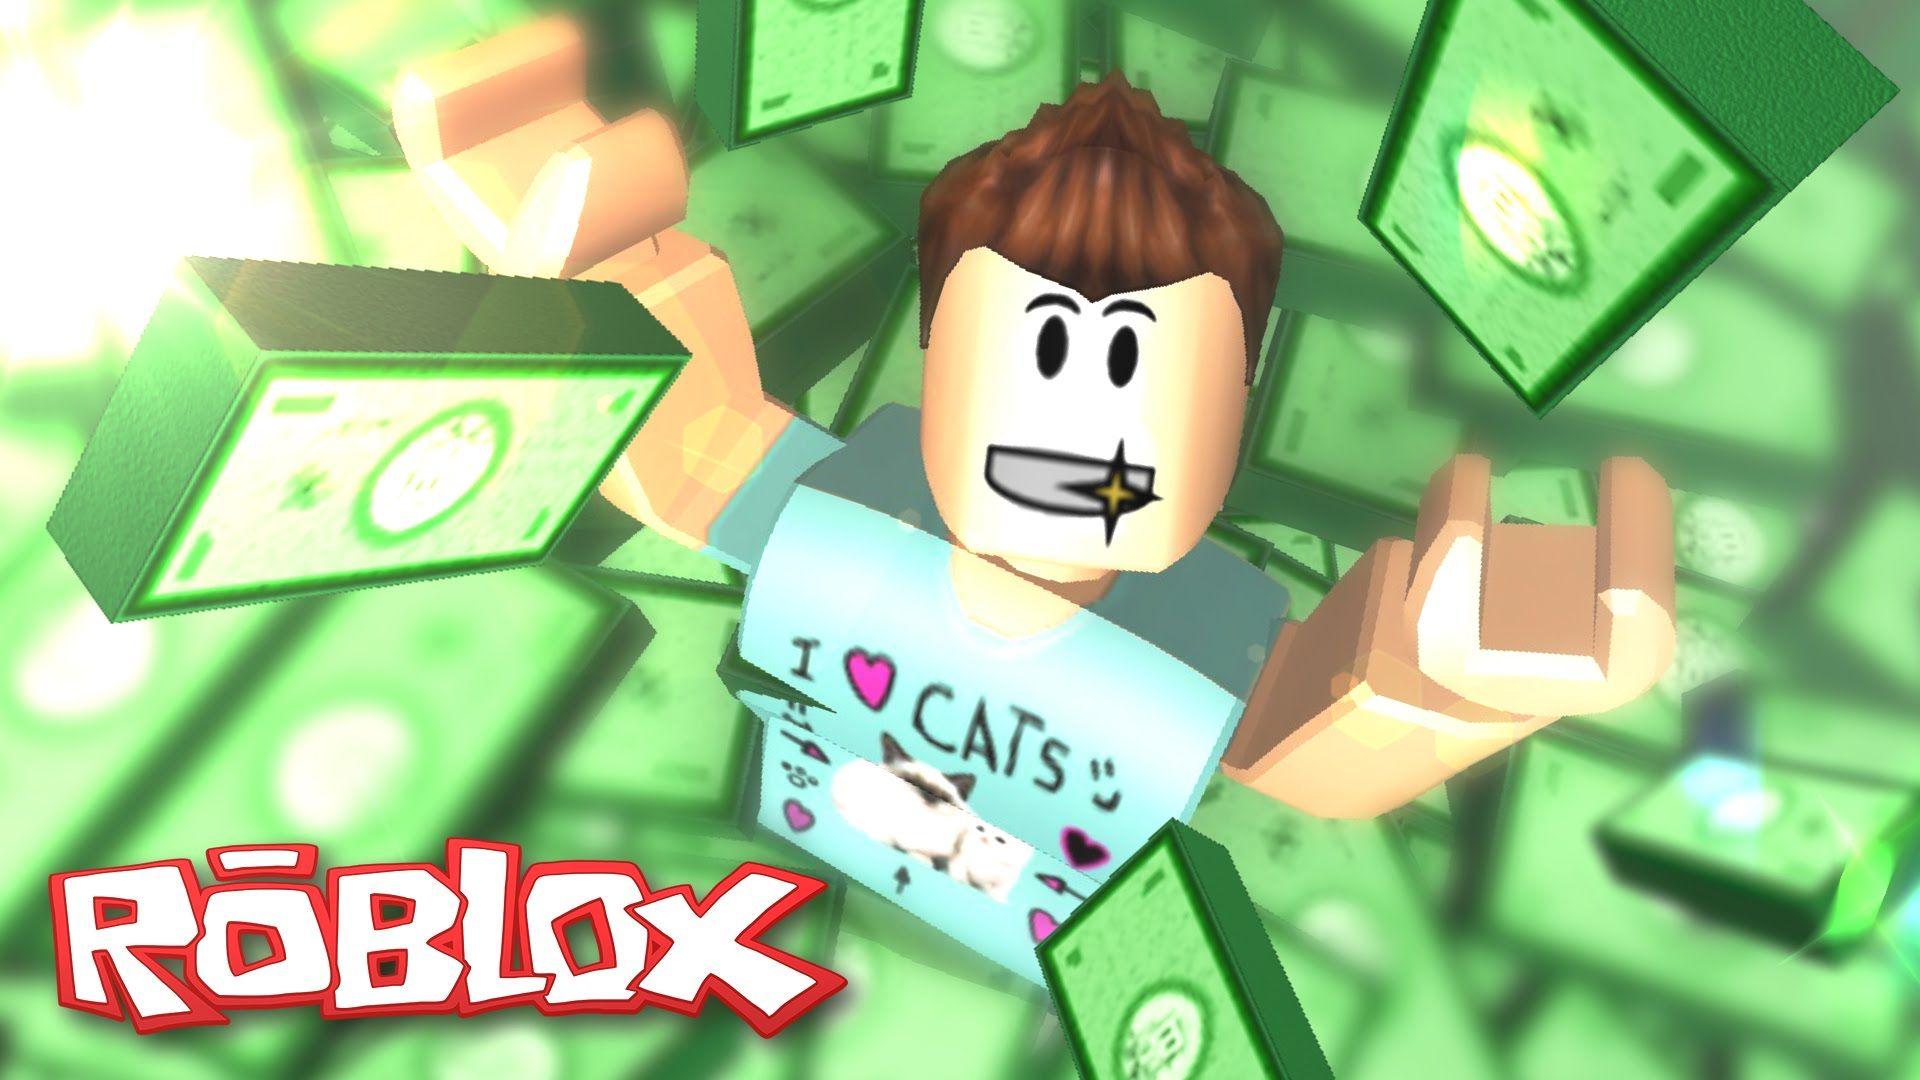 Roblox Images Hd